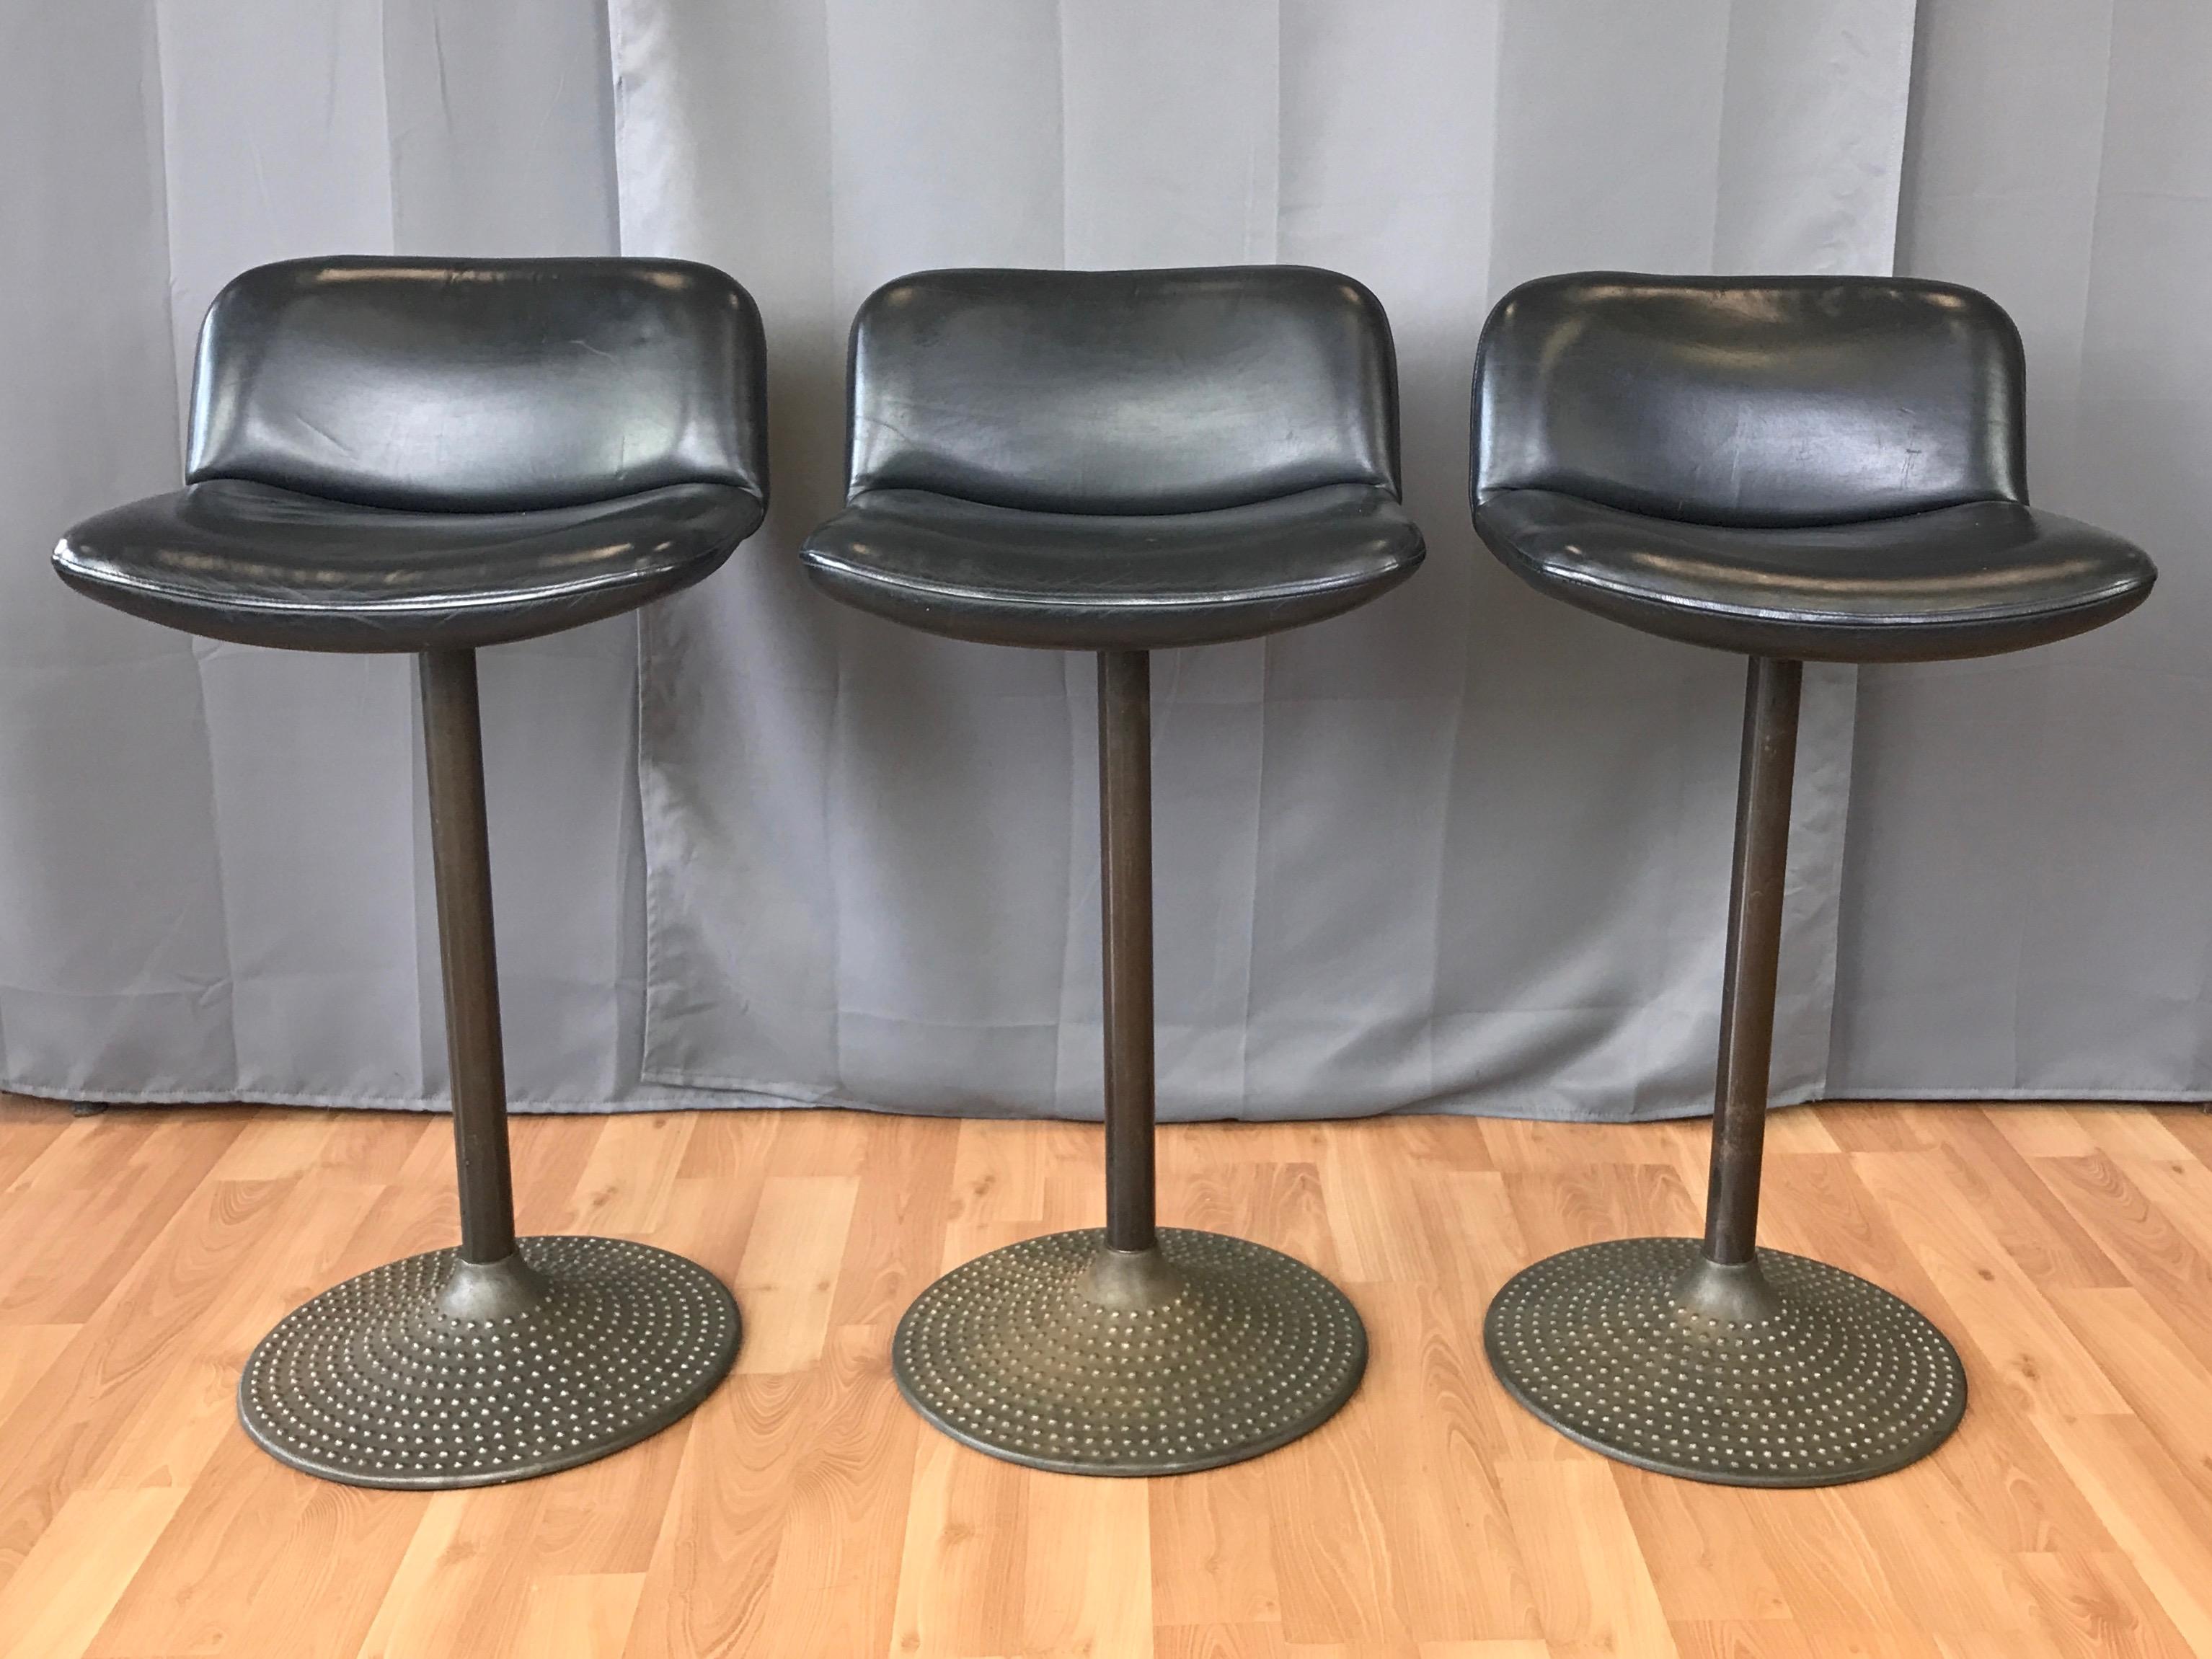 A set of three Caribe swivel barstools with leather seats by Ilmari Tapiovaara for ICF.

Hobnail textured cast steel base and tubular stem have an understated patinated bronze finish. Broad swivel seat with low back features original black leather